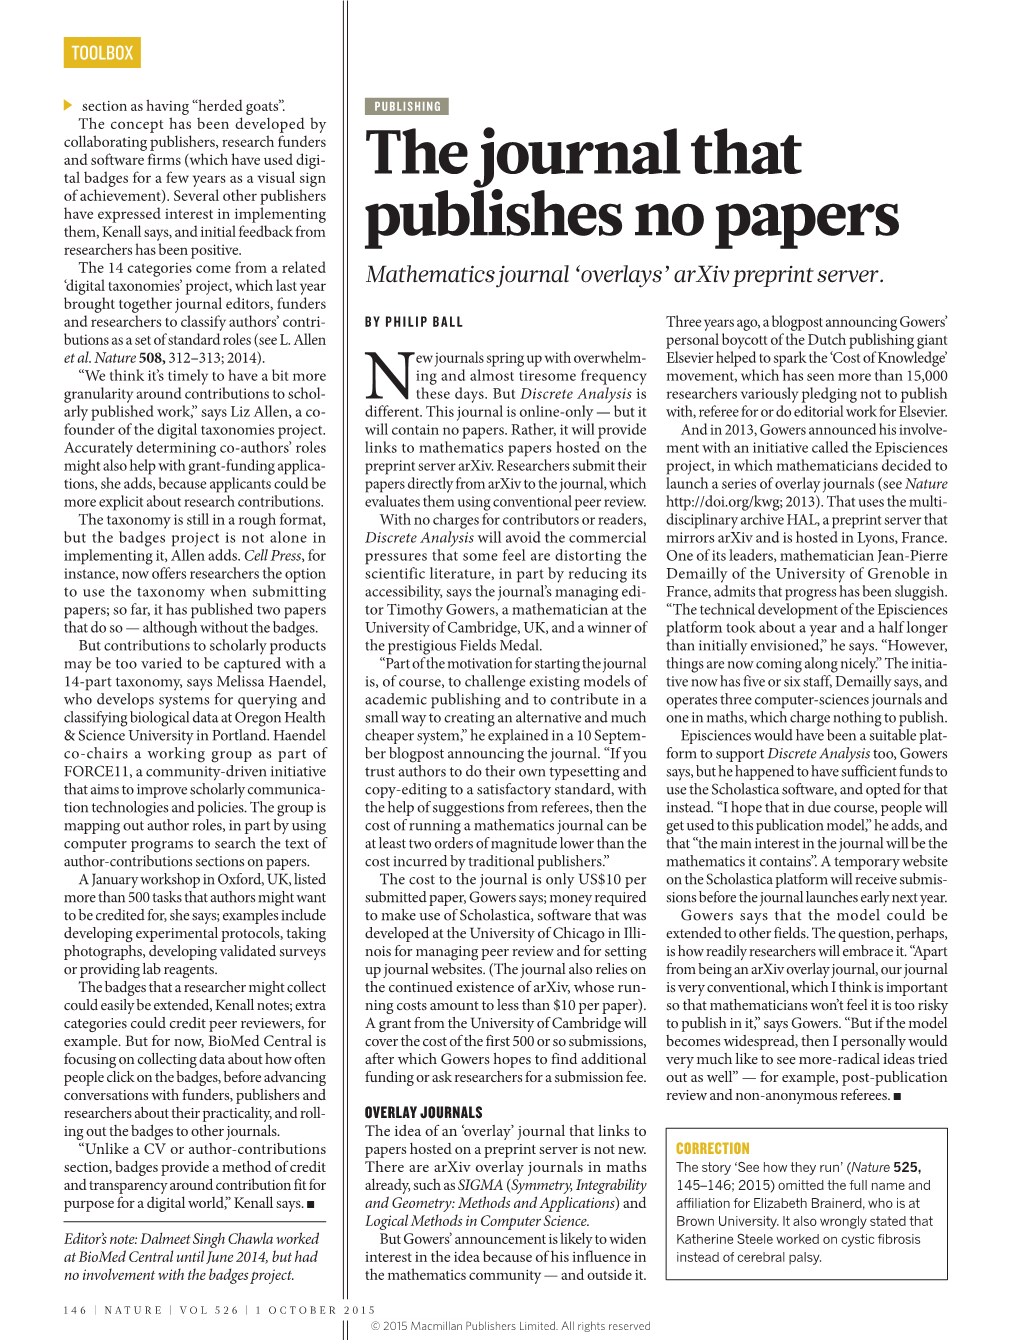 The Journal That Publishes No Papers